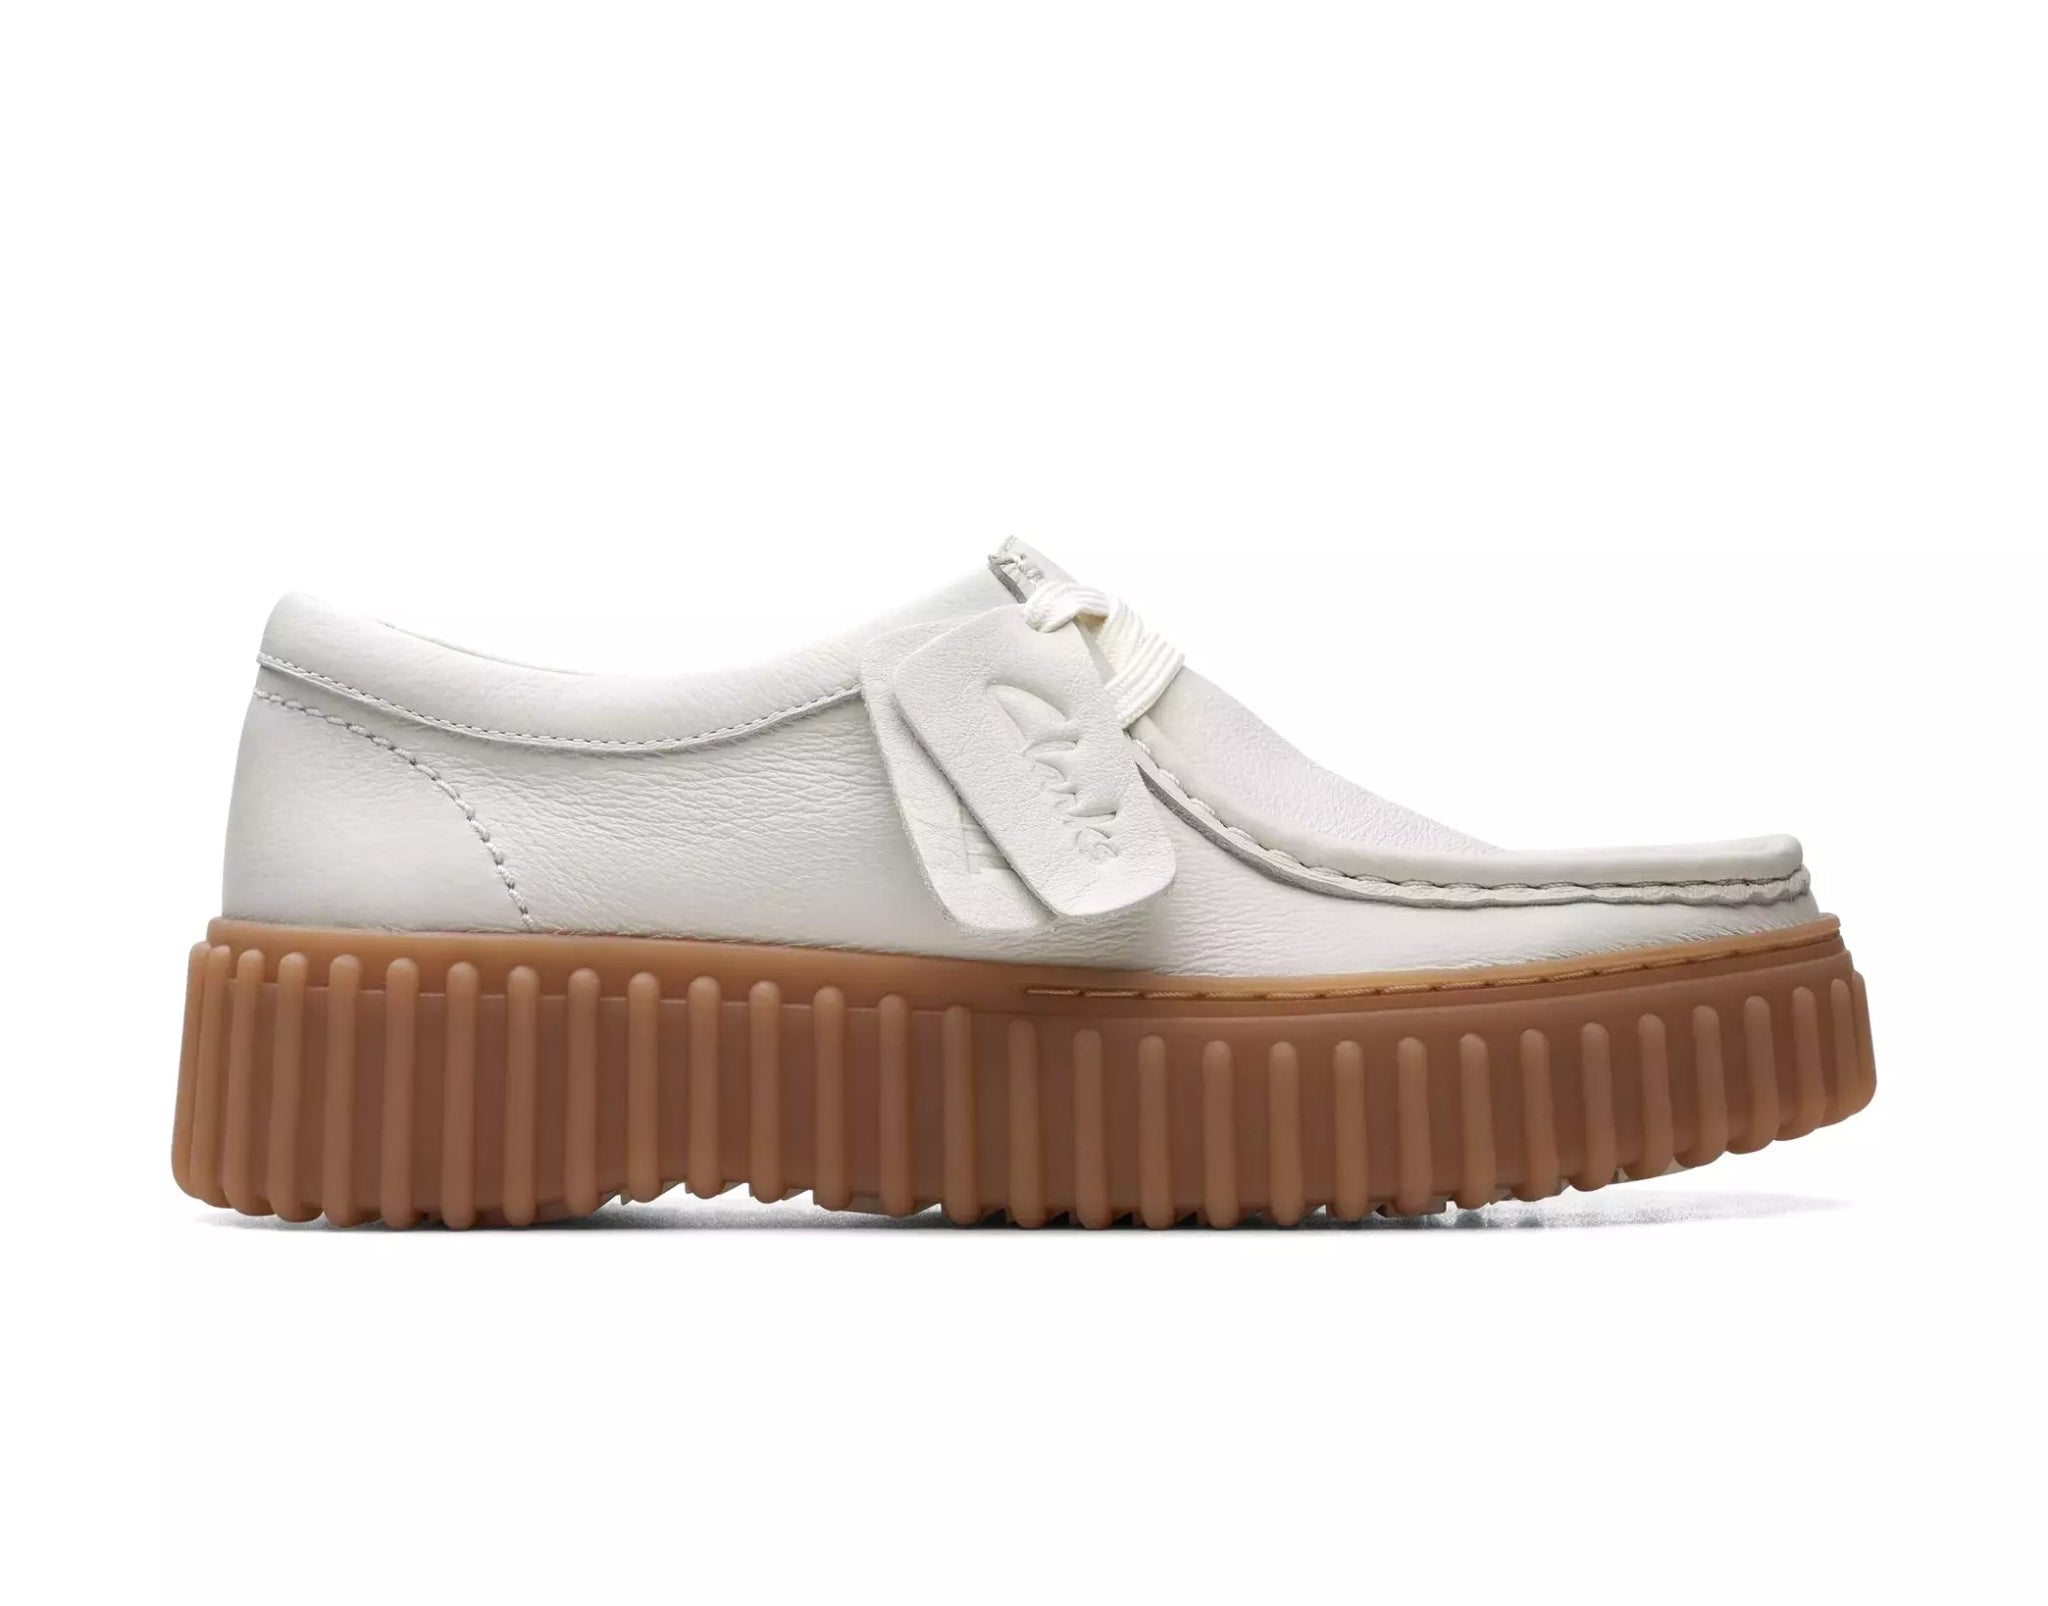 'Torhill Bee' women's lace-up shoe - off white - Chaplinshoes'Torhill Bee' women's lace-up shoe - off whiteClarks